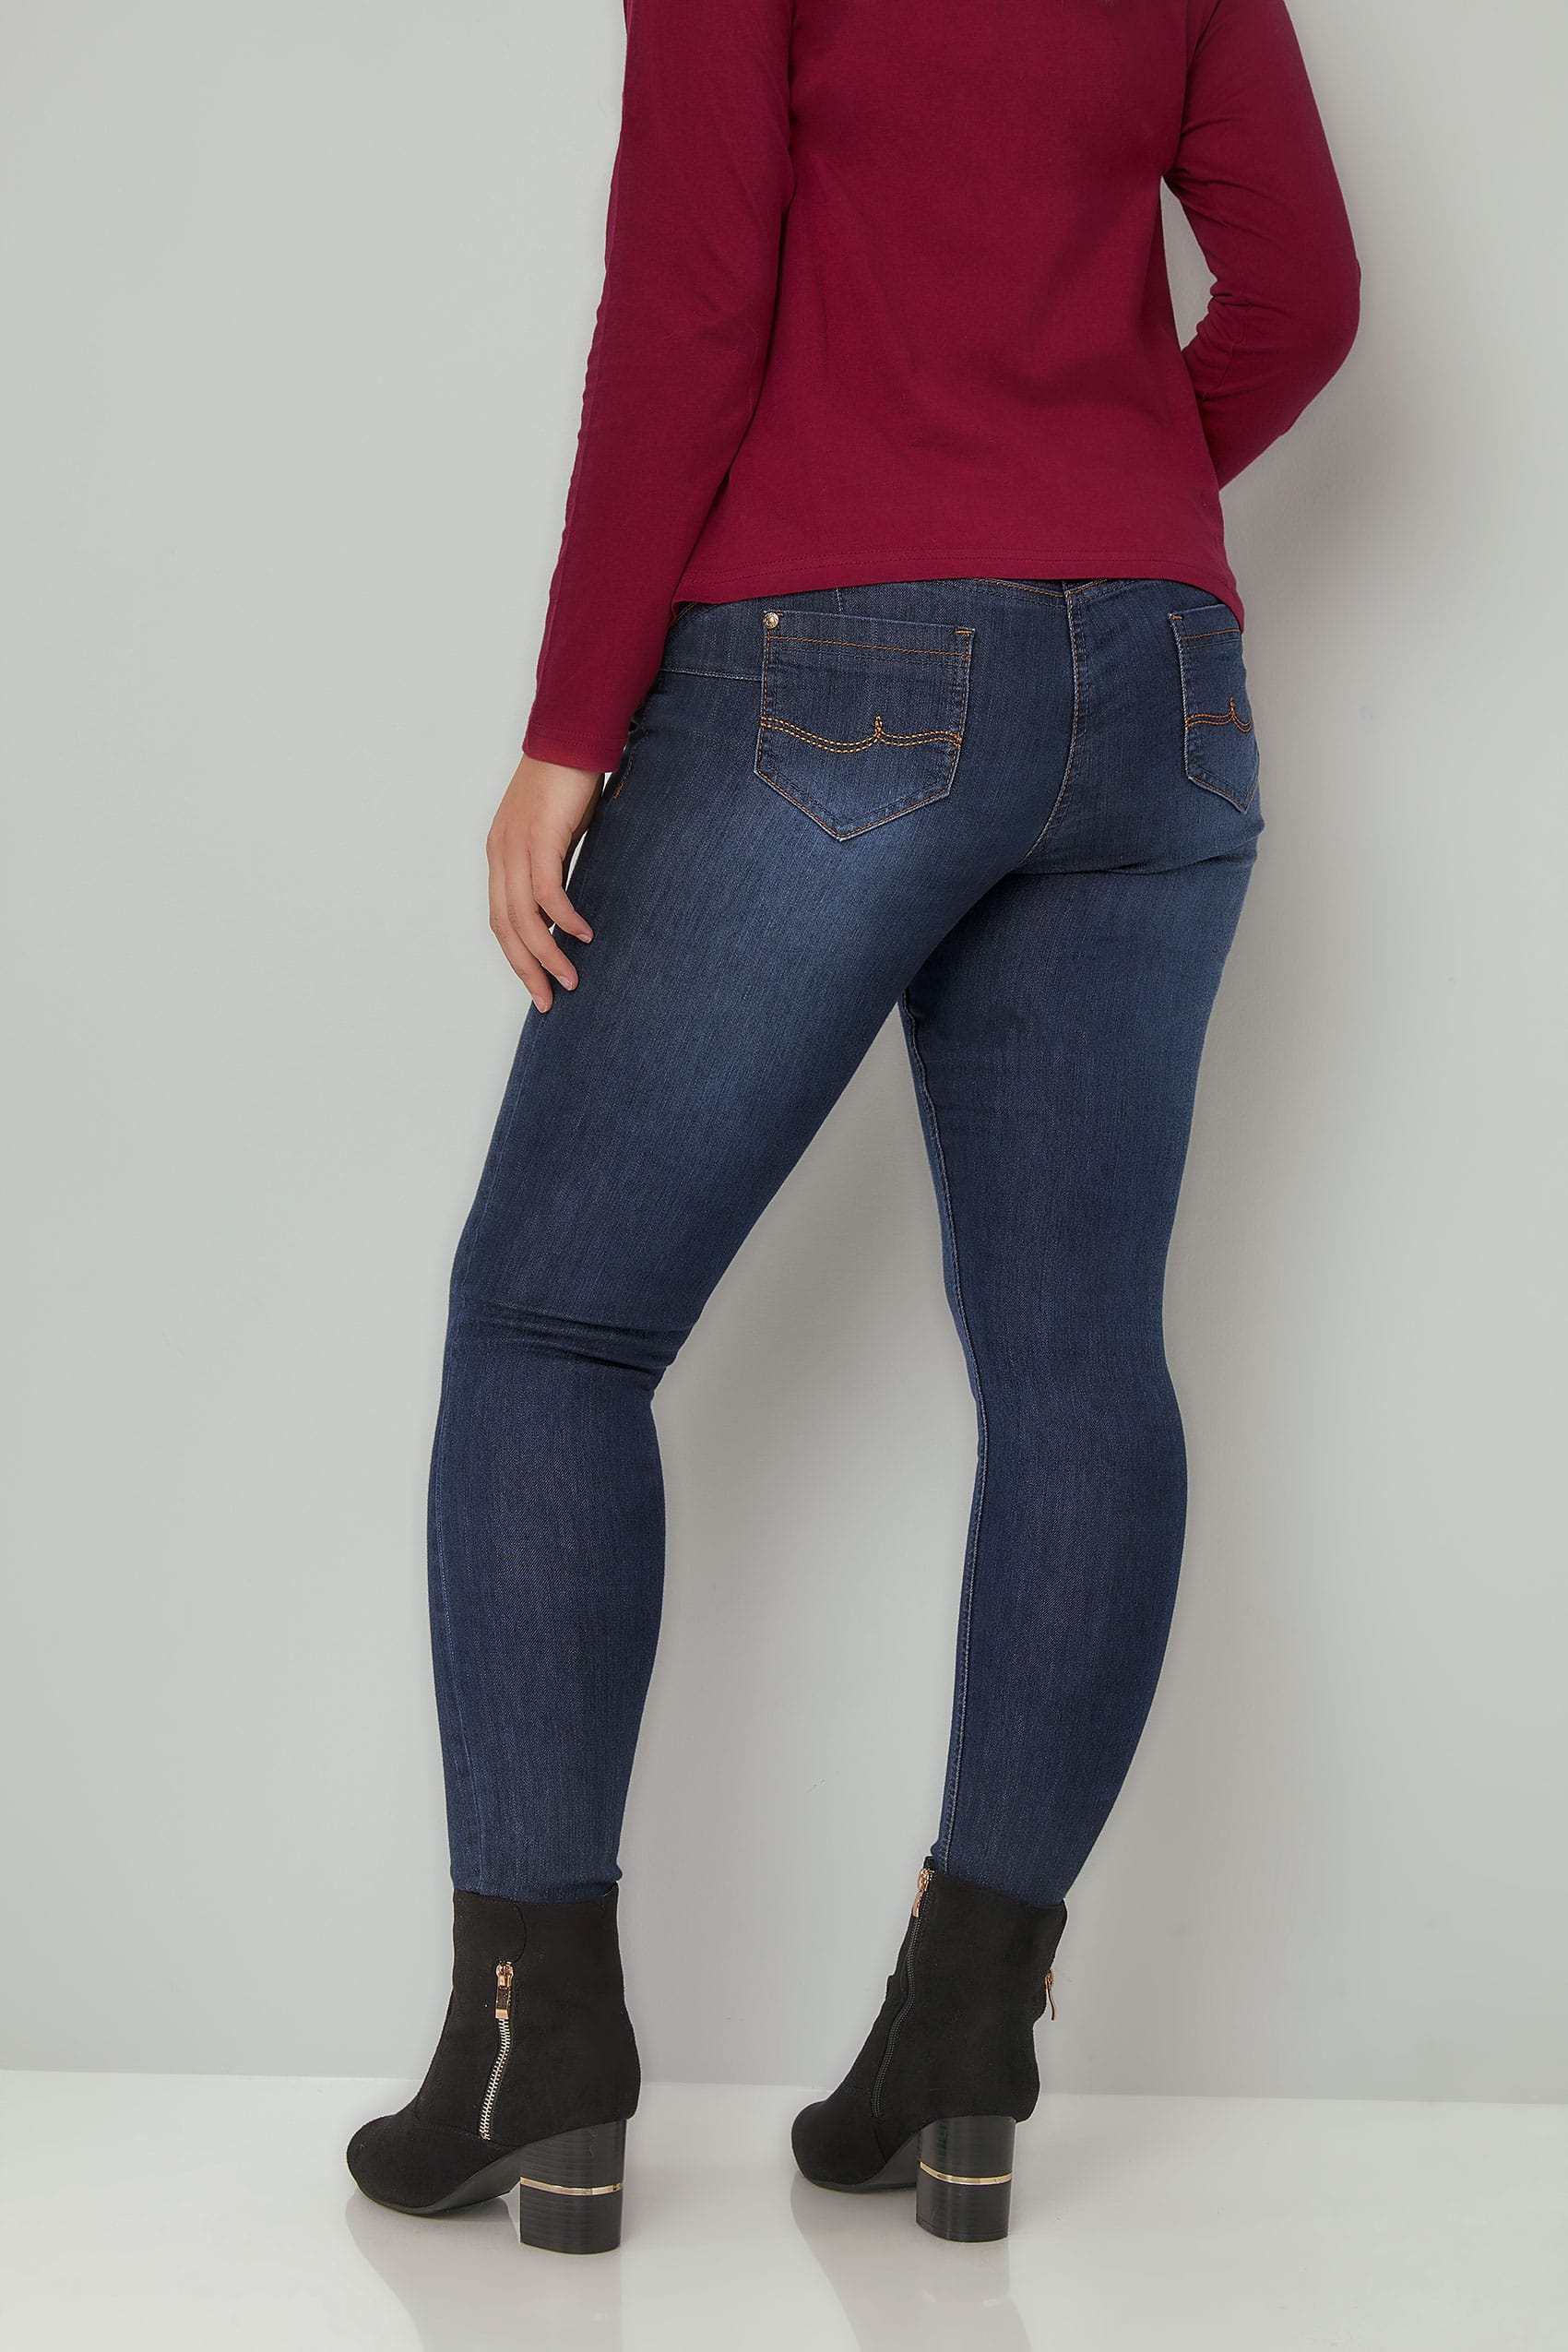 Indigo Skinny Shaper Ava Jeans Available In 30 And 32 Plus Size 16 To 32